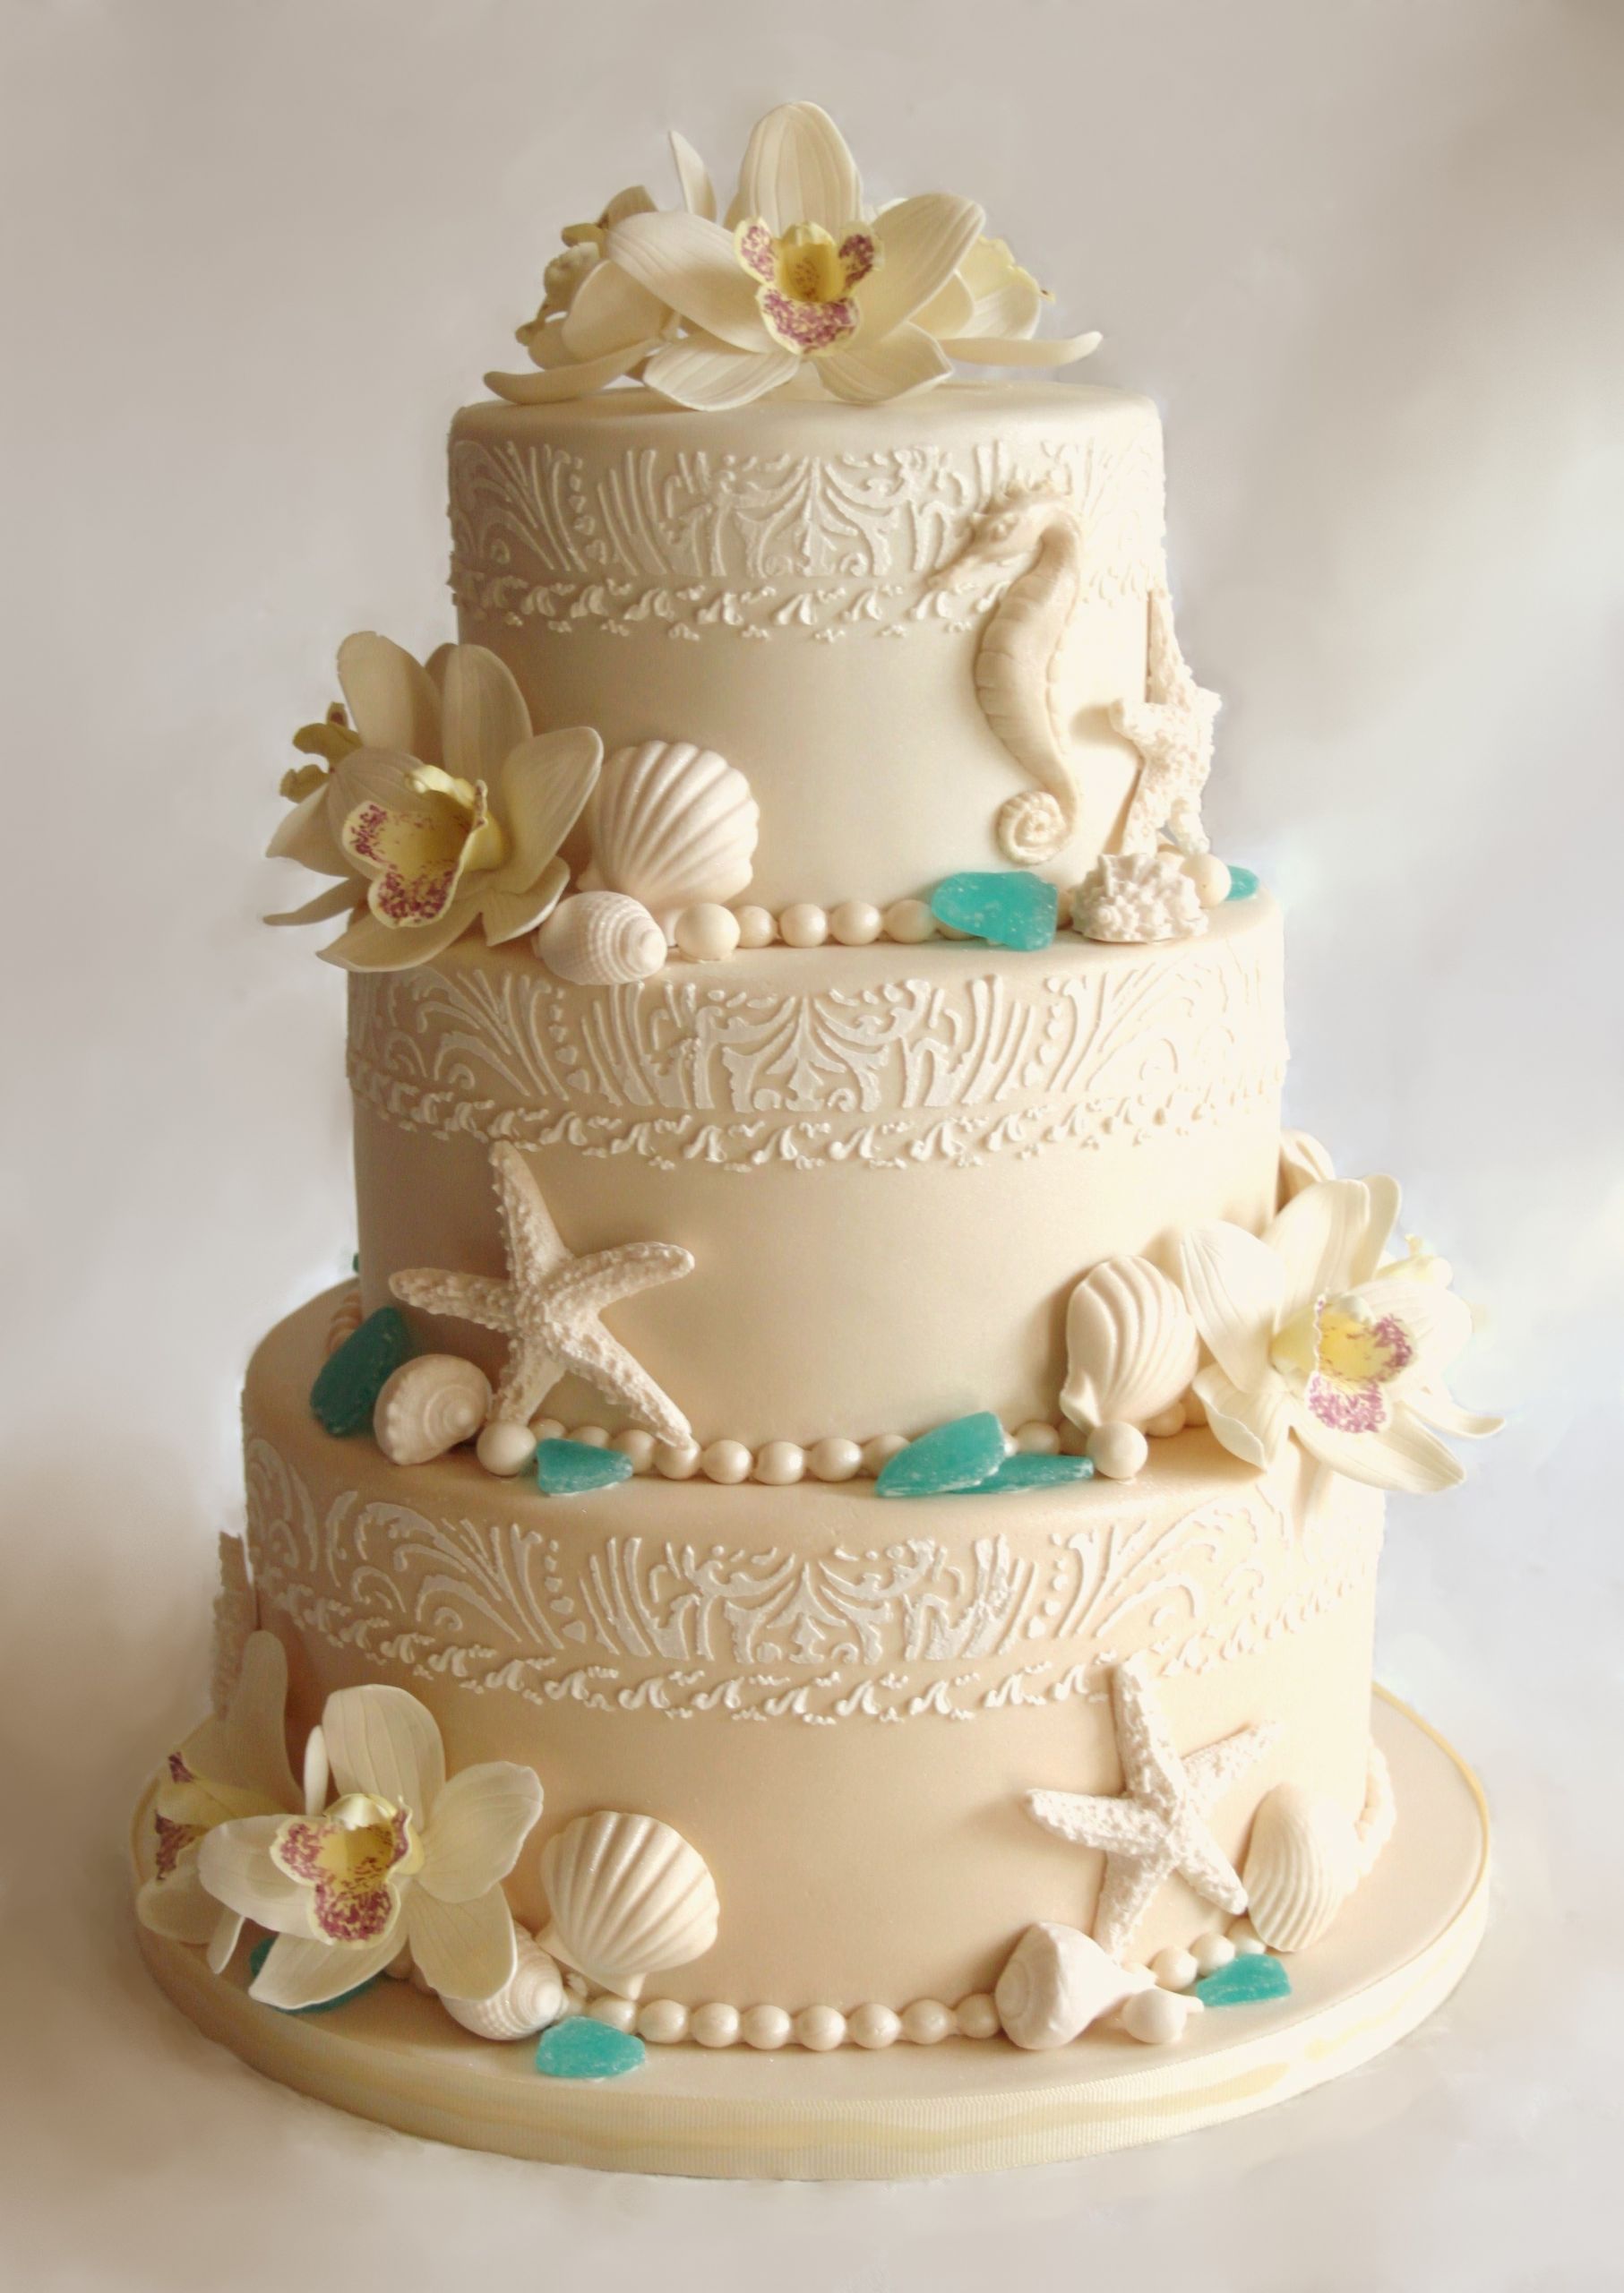 Wedding Cakes Beach Theme
 30 ULTIMATE WEDDING CAKES TO STEAL THE SHOW